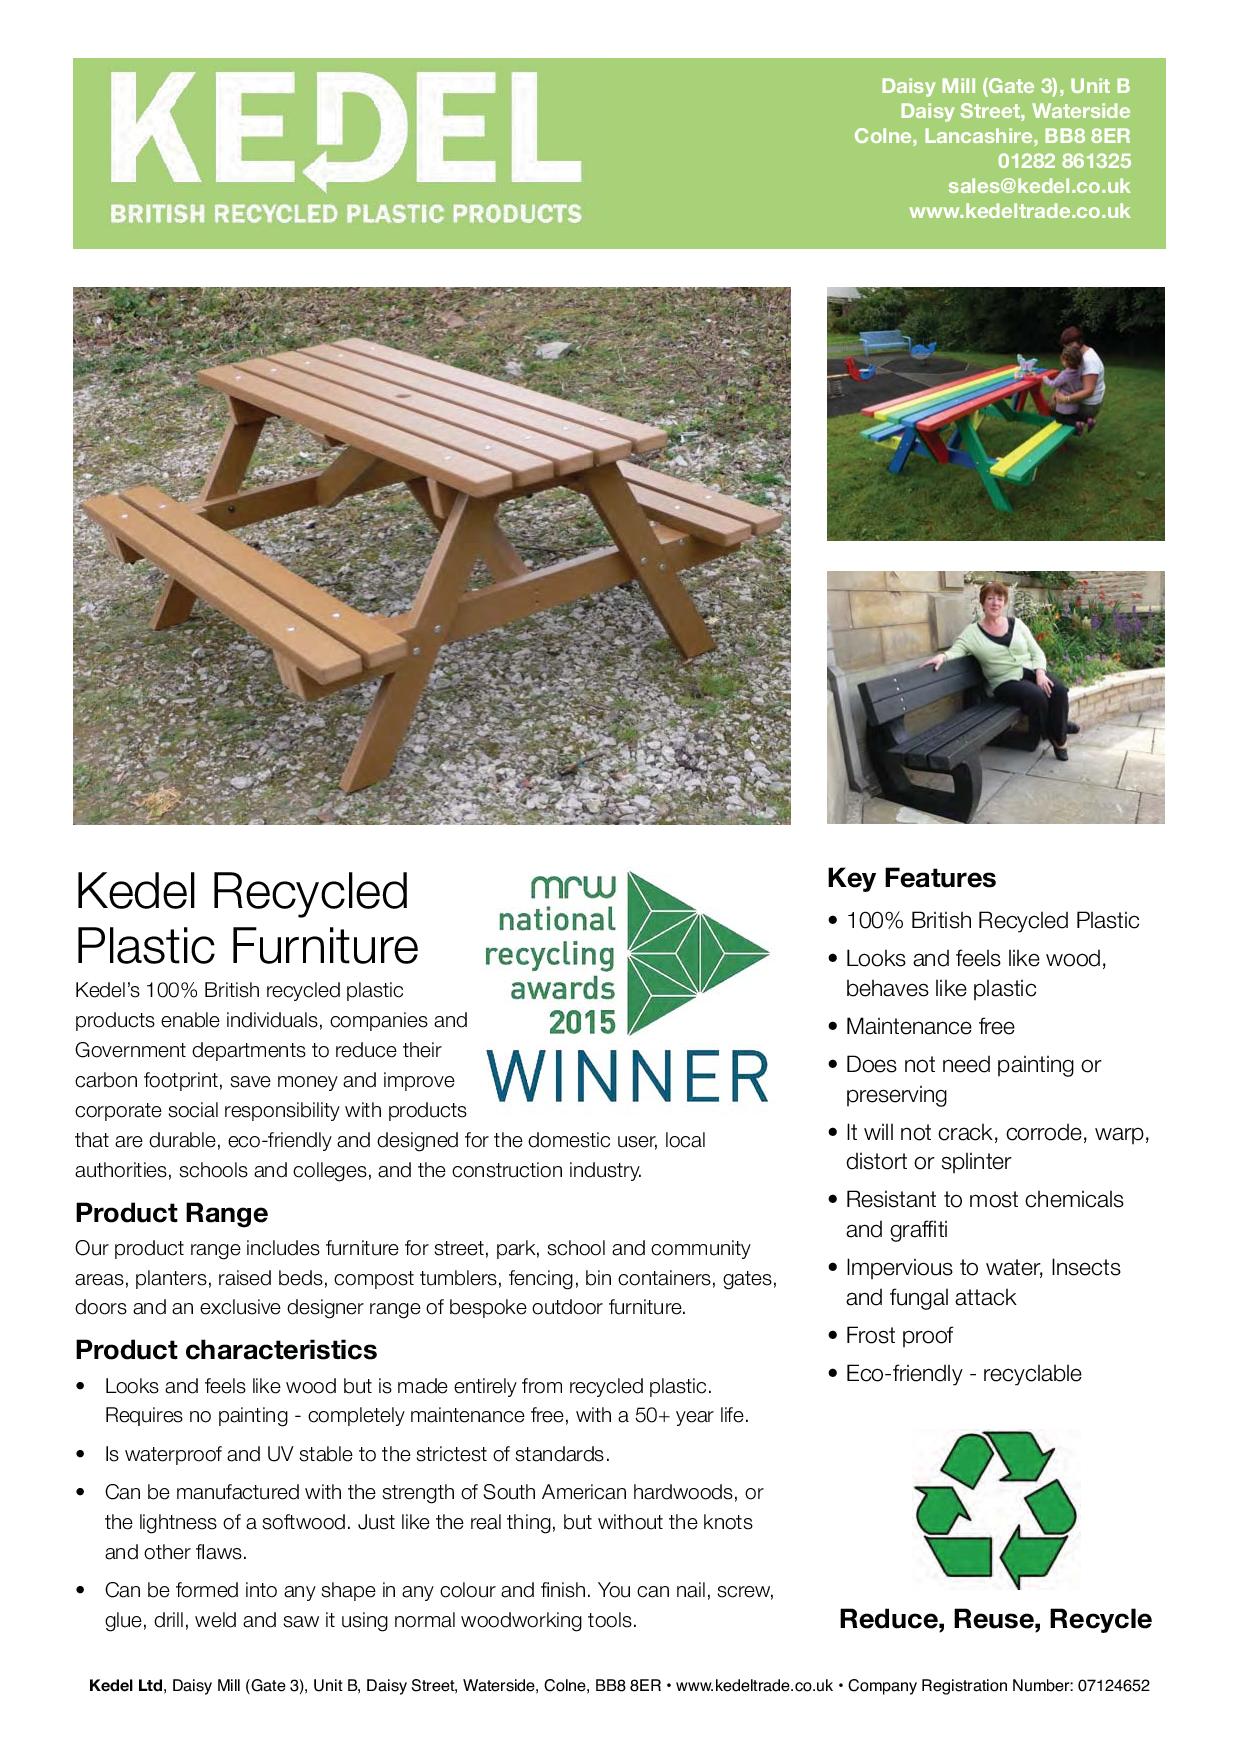 Recycled Plastic Furniture - Key Features Leaflet